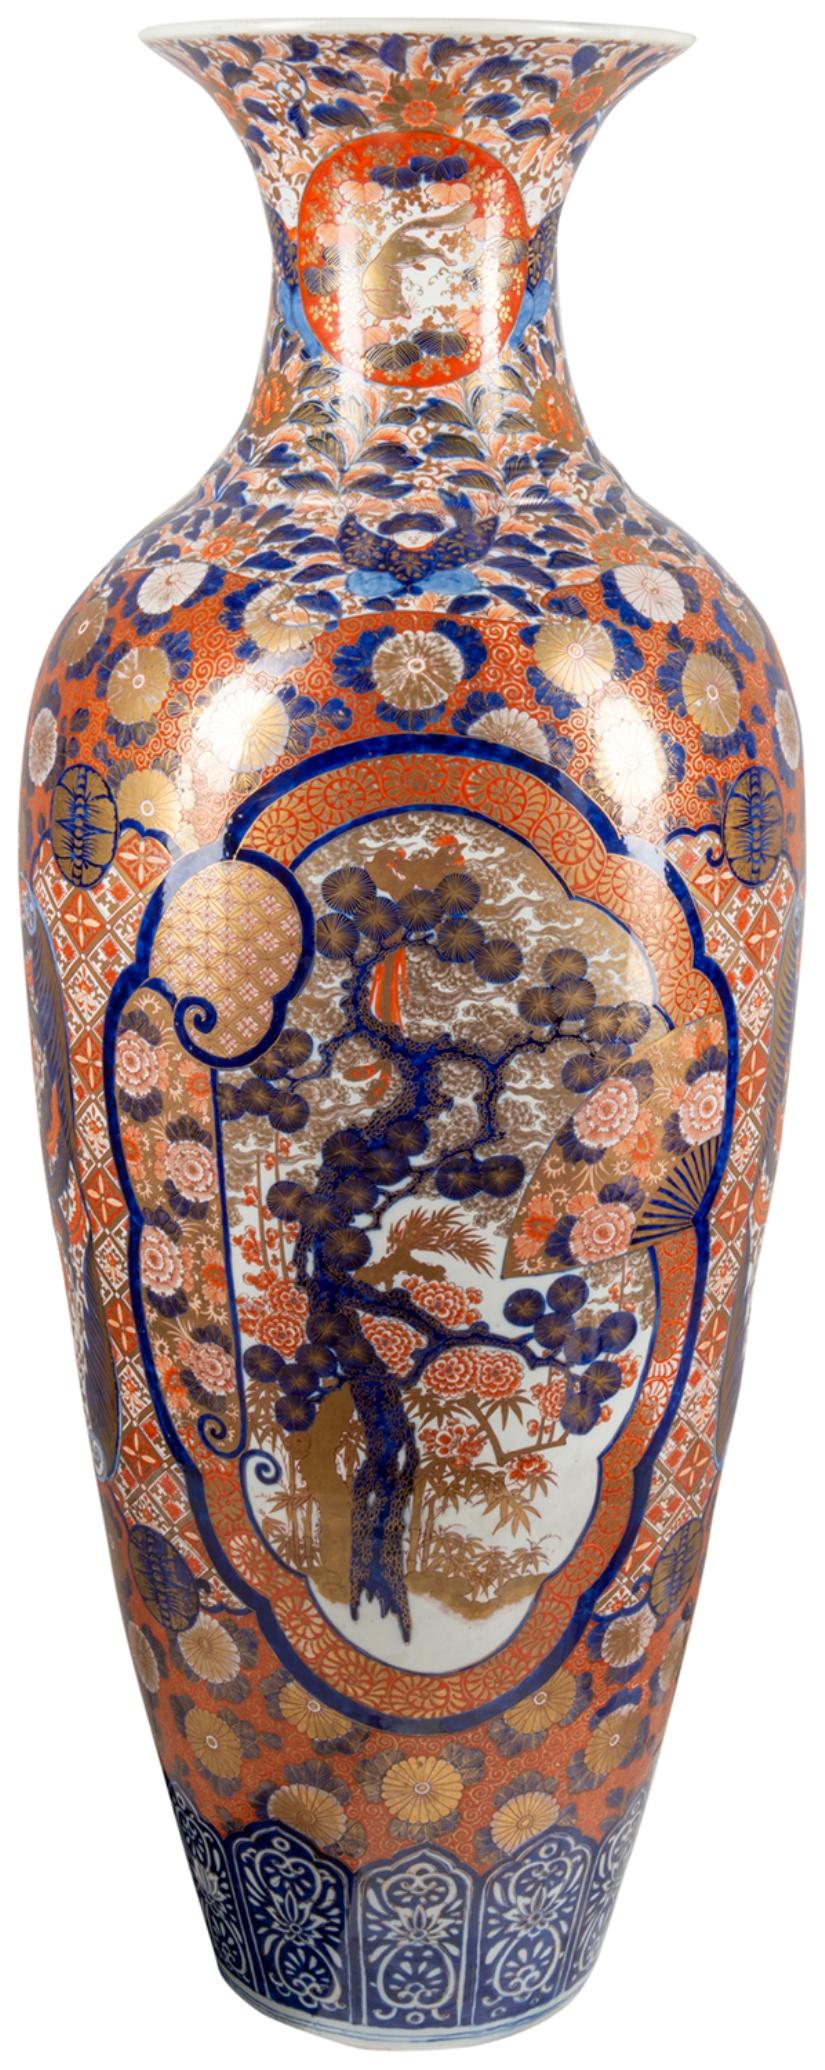 A large very good quality pair of Meiji period (1868-1912) Japanese Imari porcelain vases, each with the classical red and blue ground, with classical flower, leaf and motif decoration, inset hand painted panels depicting blossom trees, fans and